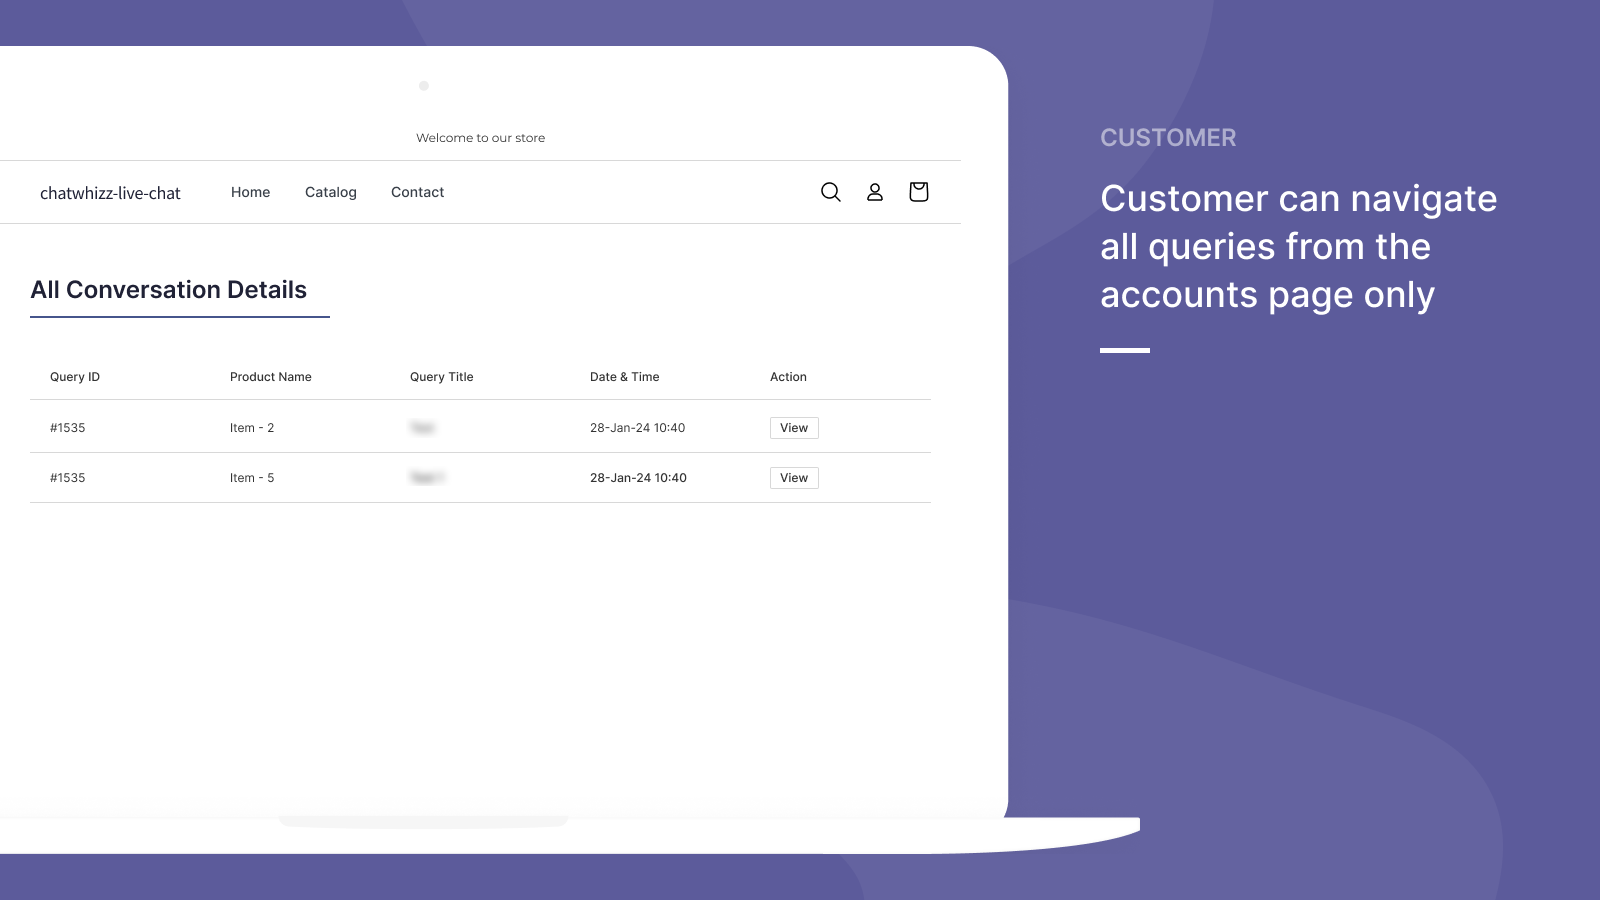 Customers can navigate all queries from the accounts page only.